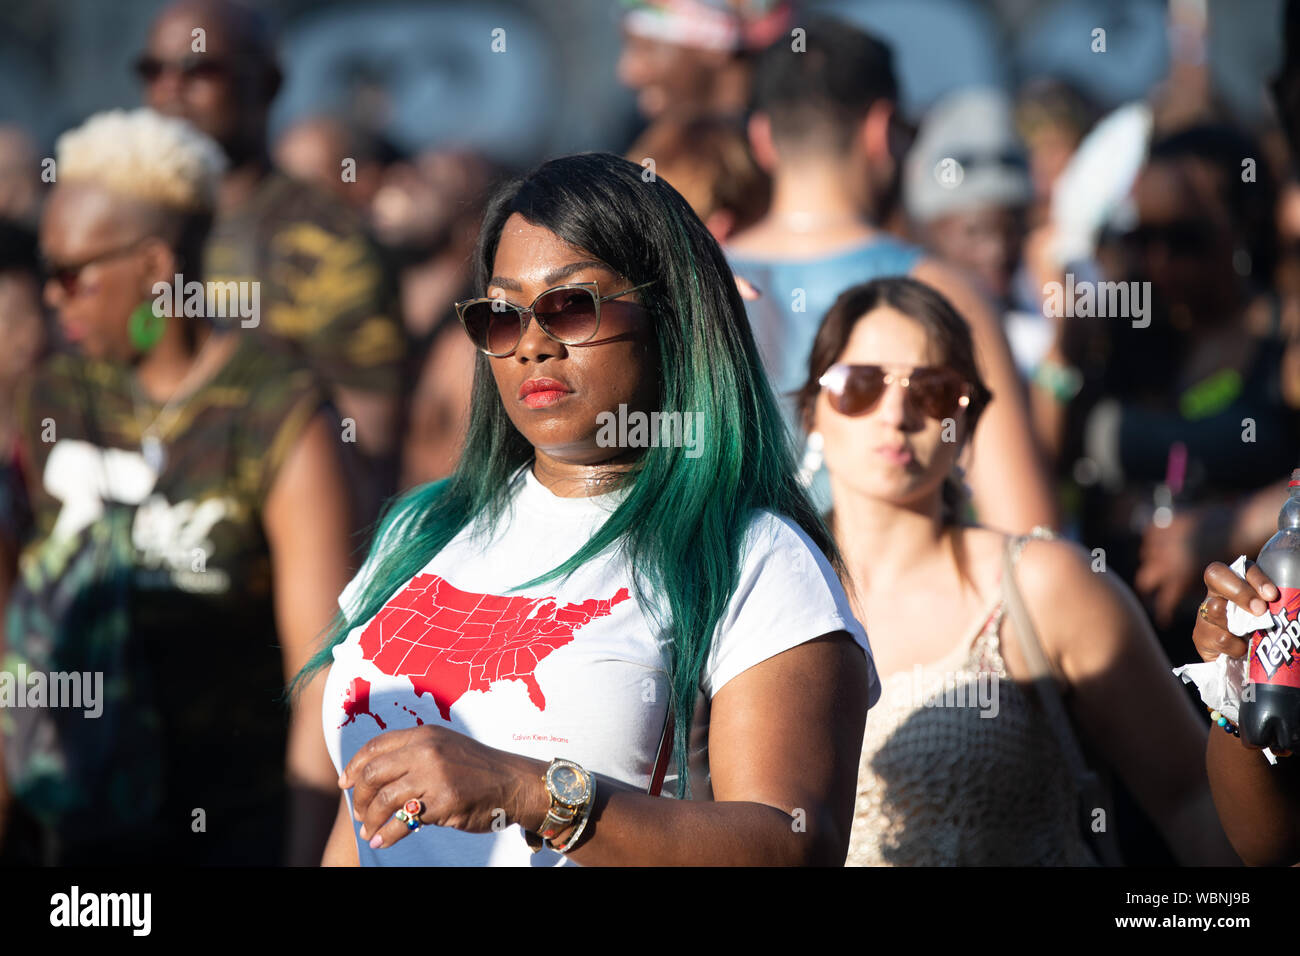 A woman with green hair and sunglasses attending Notting Hill Carnival, the largest carnival in Europe. Stock Photo